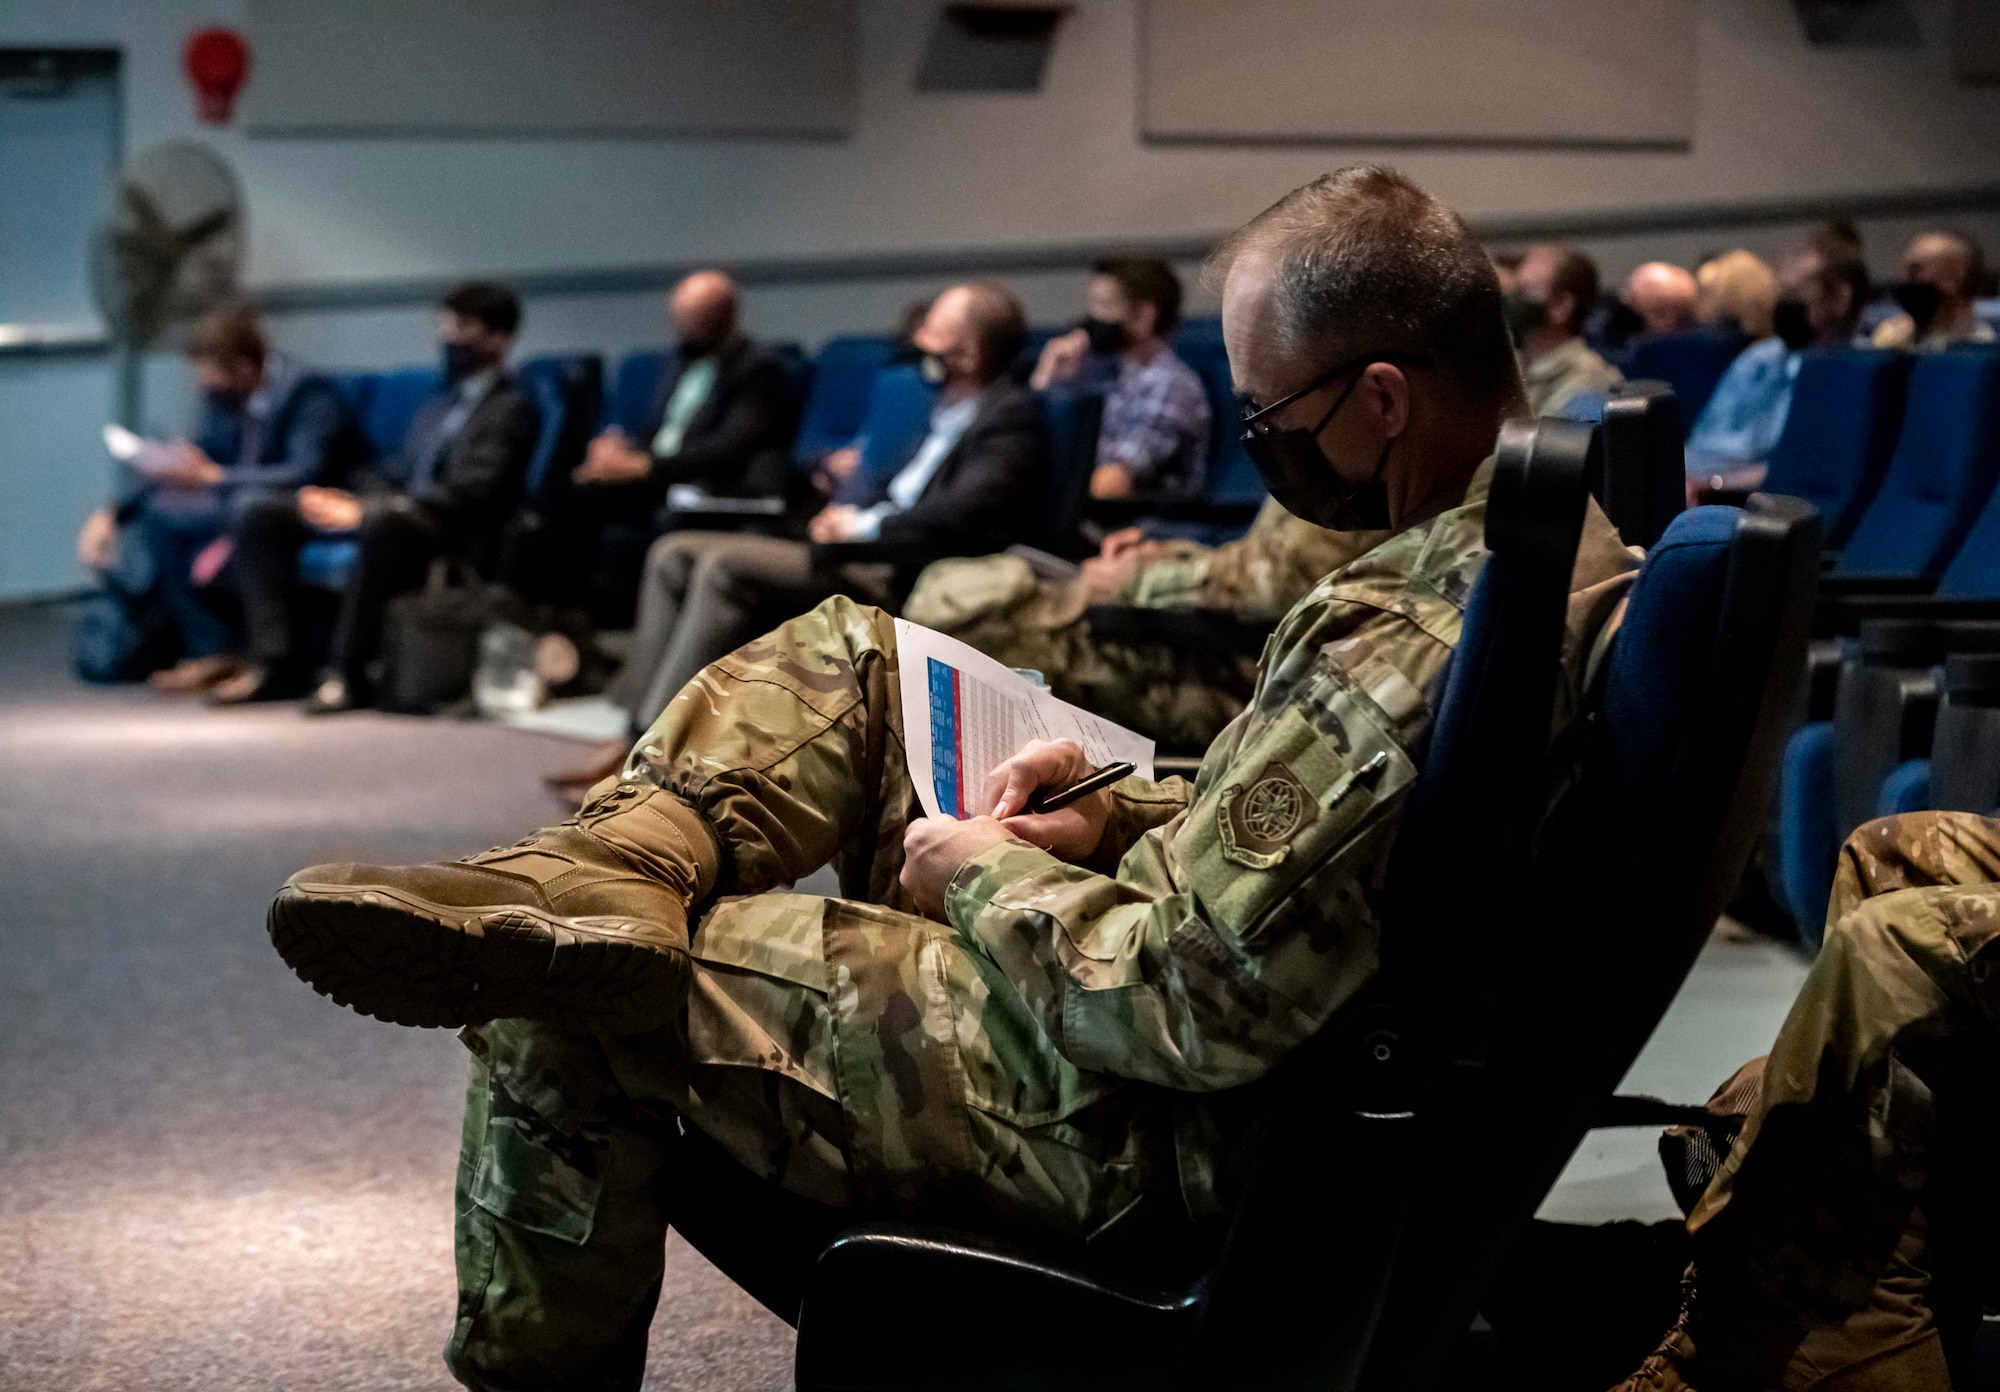 Chief Master Sgt. Timothy Bayes, 436th Airlift Wing command chief, takes notes while listening to guest speaker Chris Locke during a mental health seminar at Dover Air Force Base, Delaware, Sept. 28, 2021. Locke, a 436th Airlift Wing honorary commander, formed the SL24 UnLocke the Light Foundation to educate and assist those dealing with depression and suicidal thoughts after losing his son, Sean, to suicide in 2018. (U.S. Air Force photo by Senior Airman Stephani Barge)